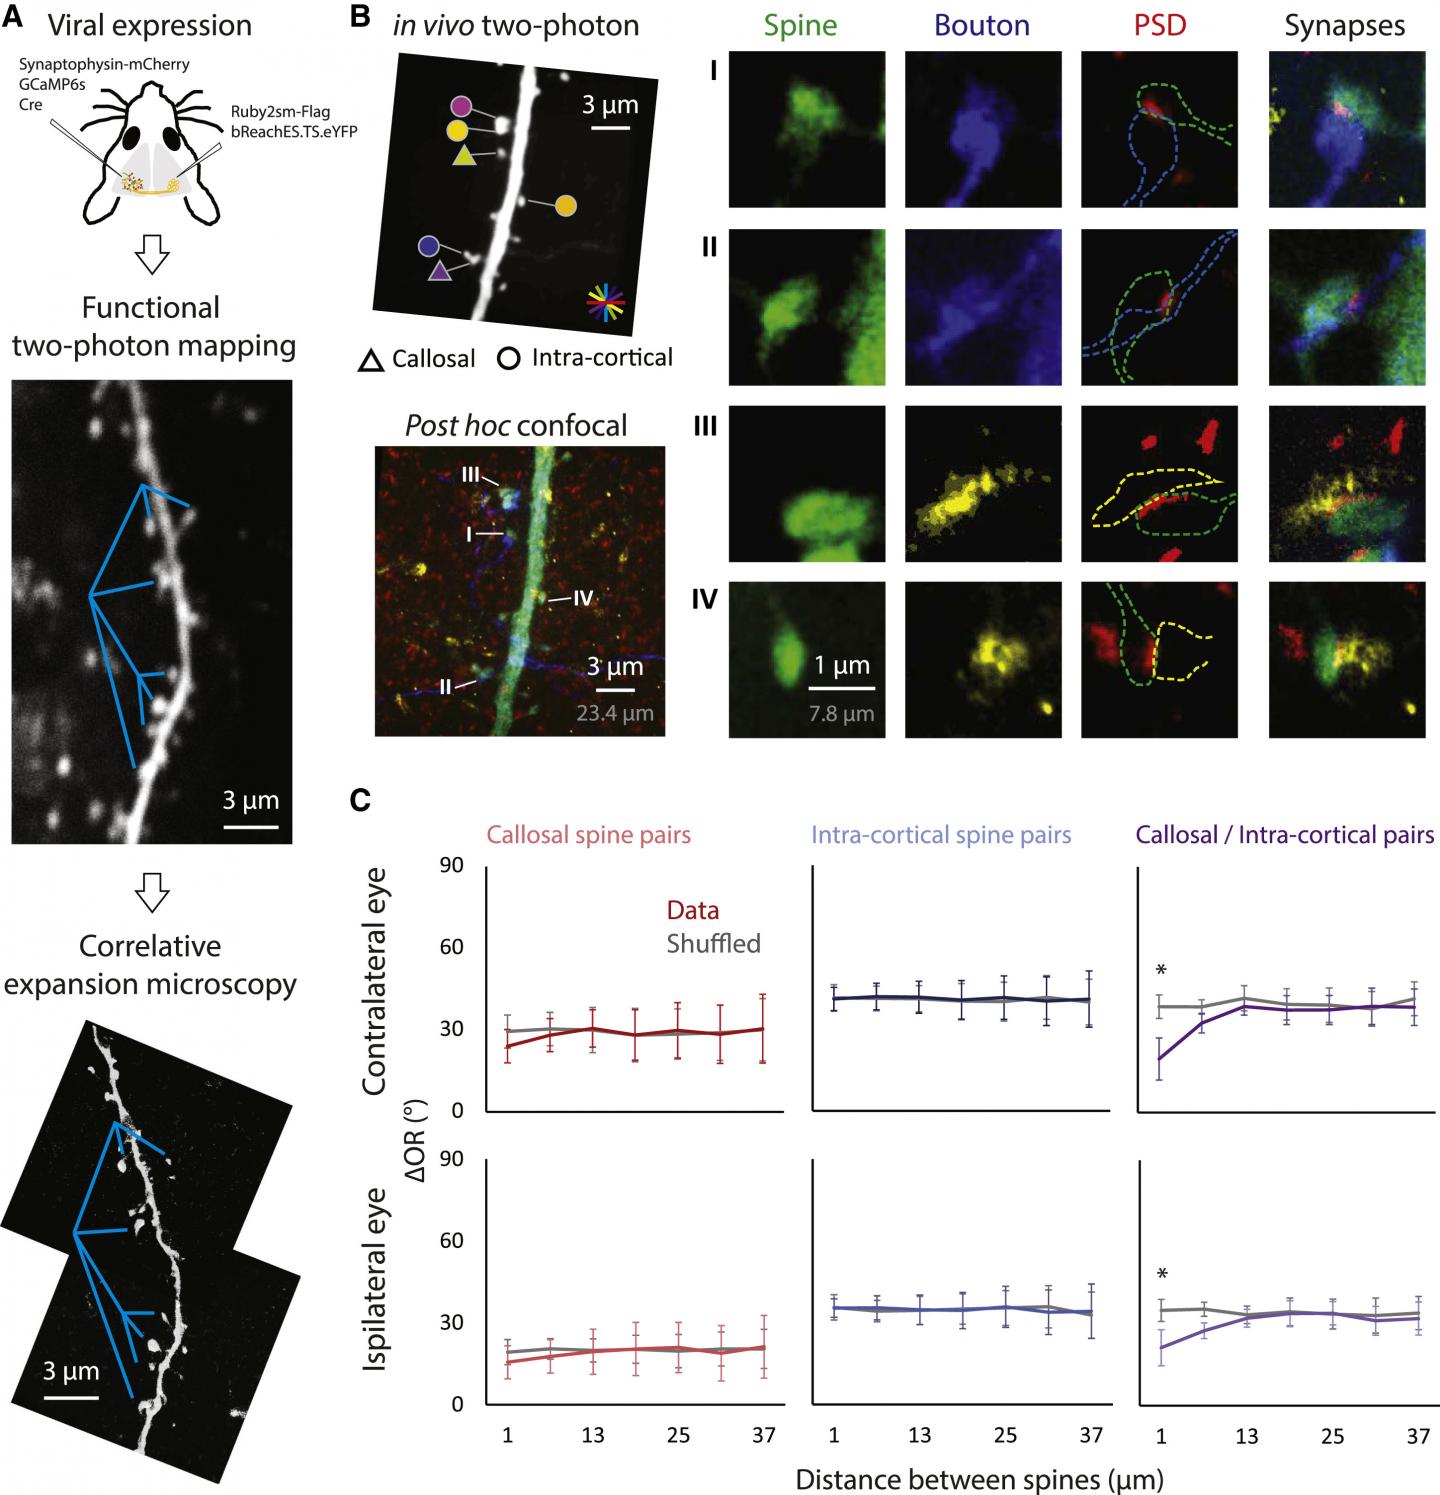 Functional Clustering Between the Callosal and Intra-Cortical Spine Pairs